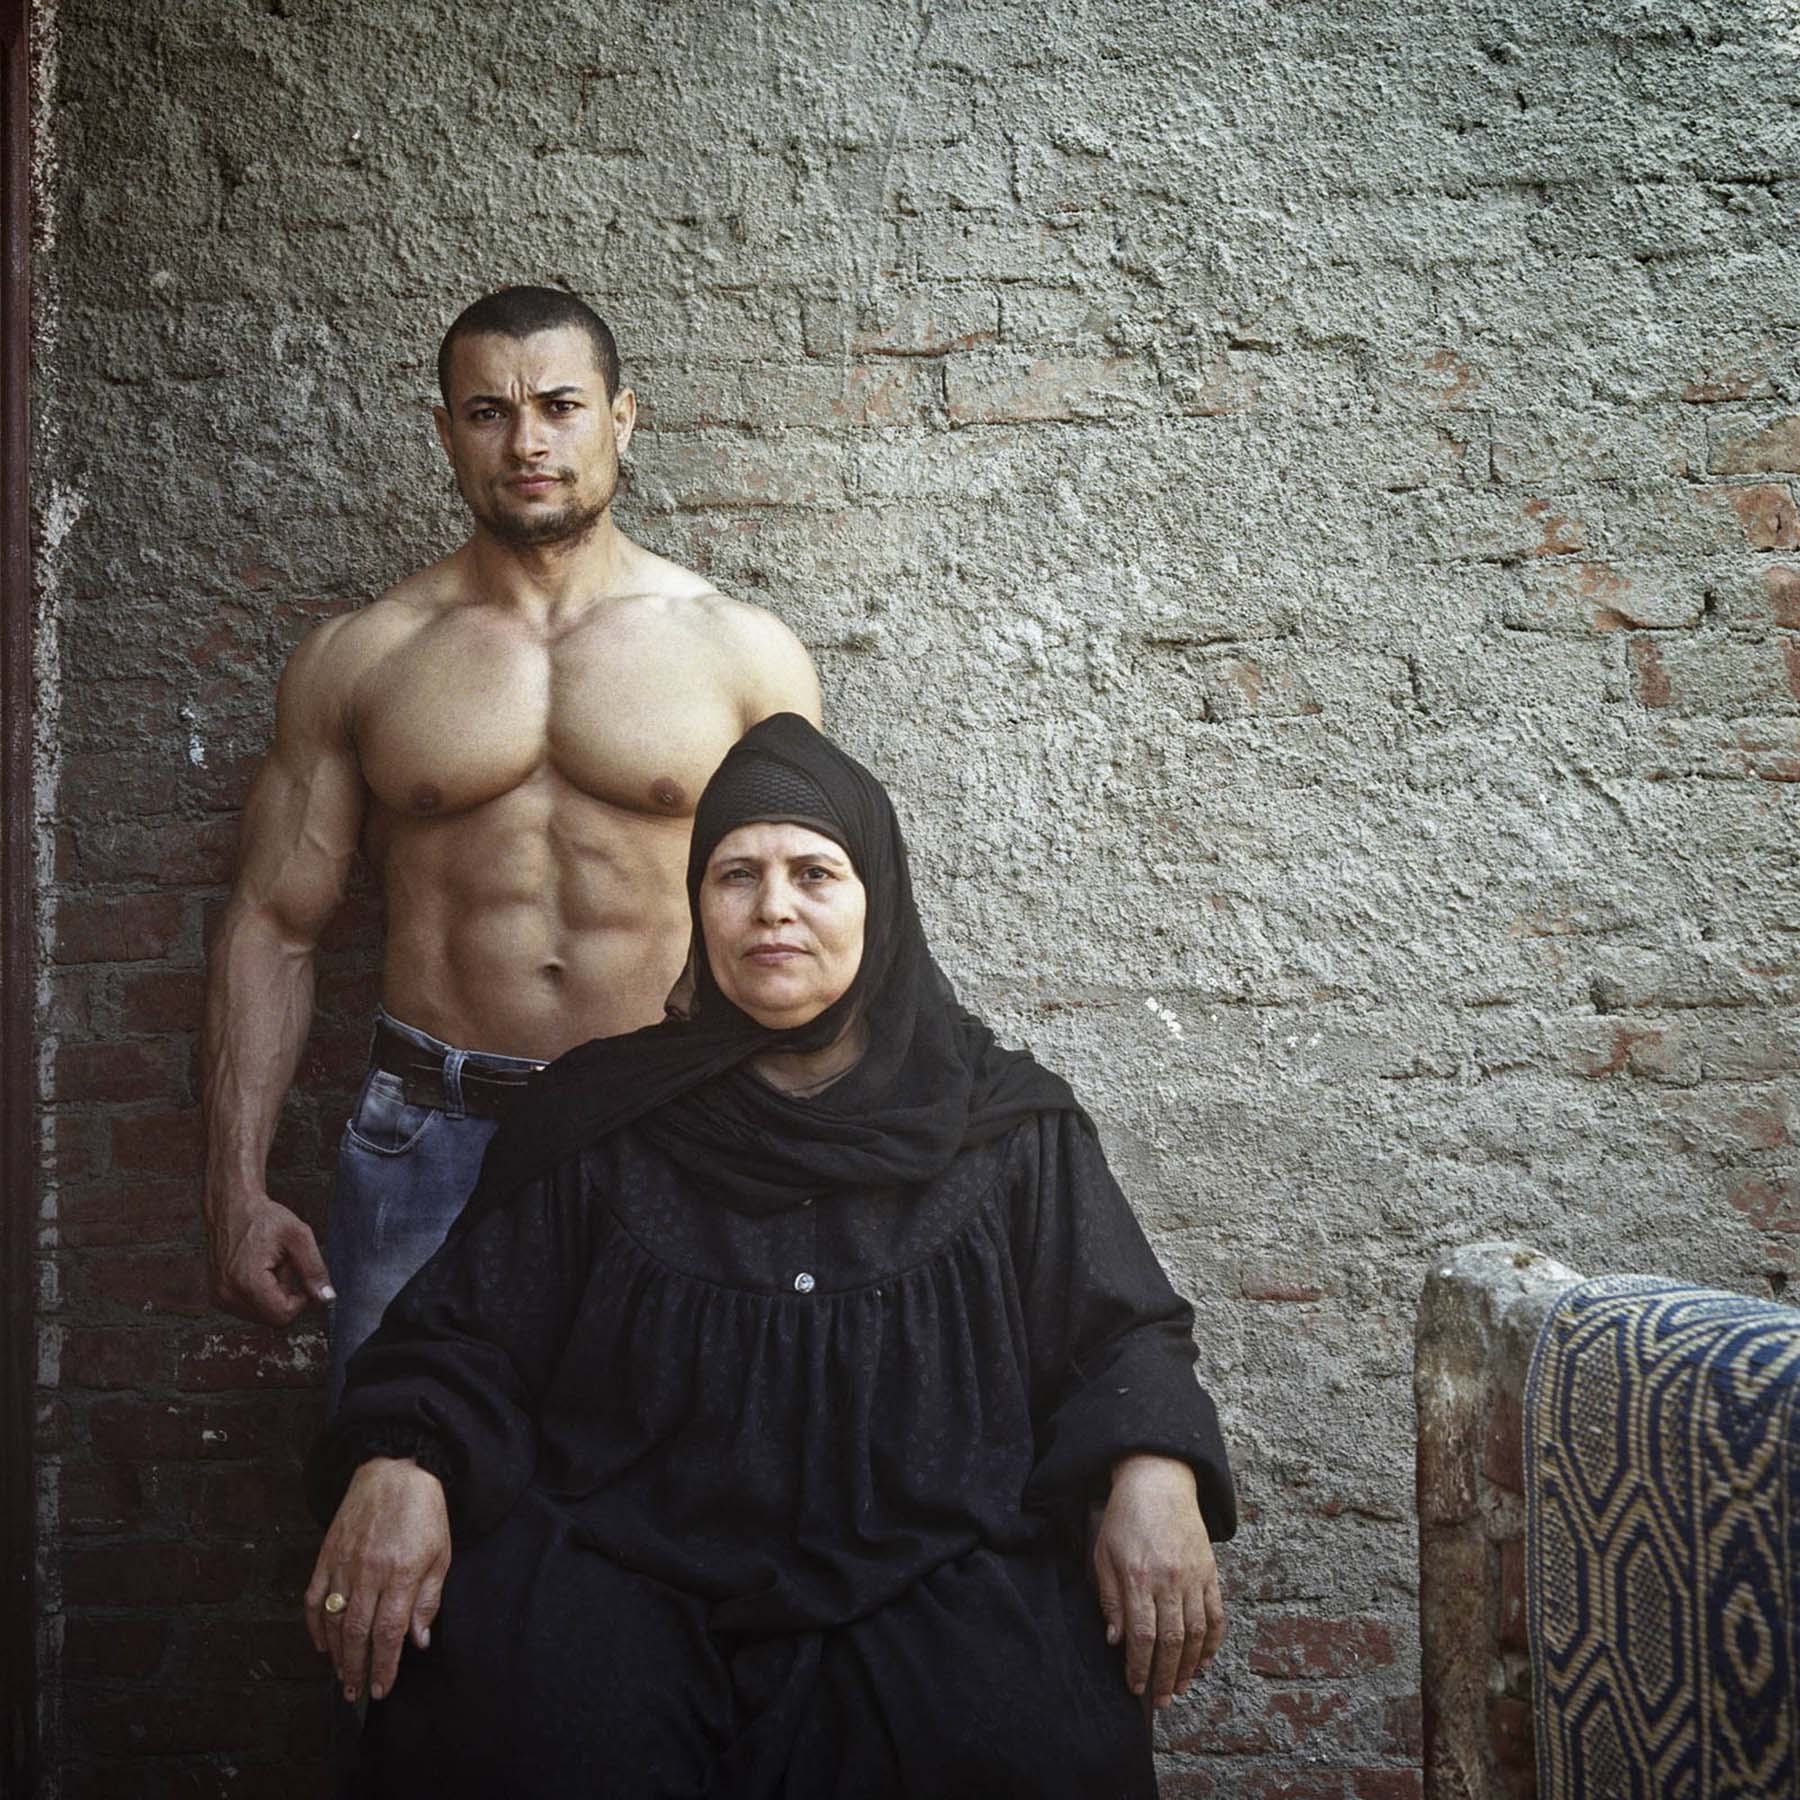 A Telling Portrait Of Egypt, Mother and Son - IGNANT